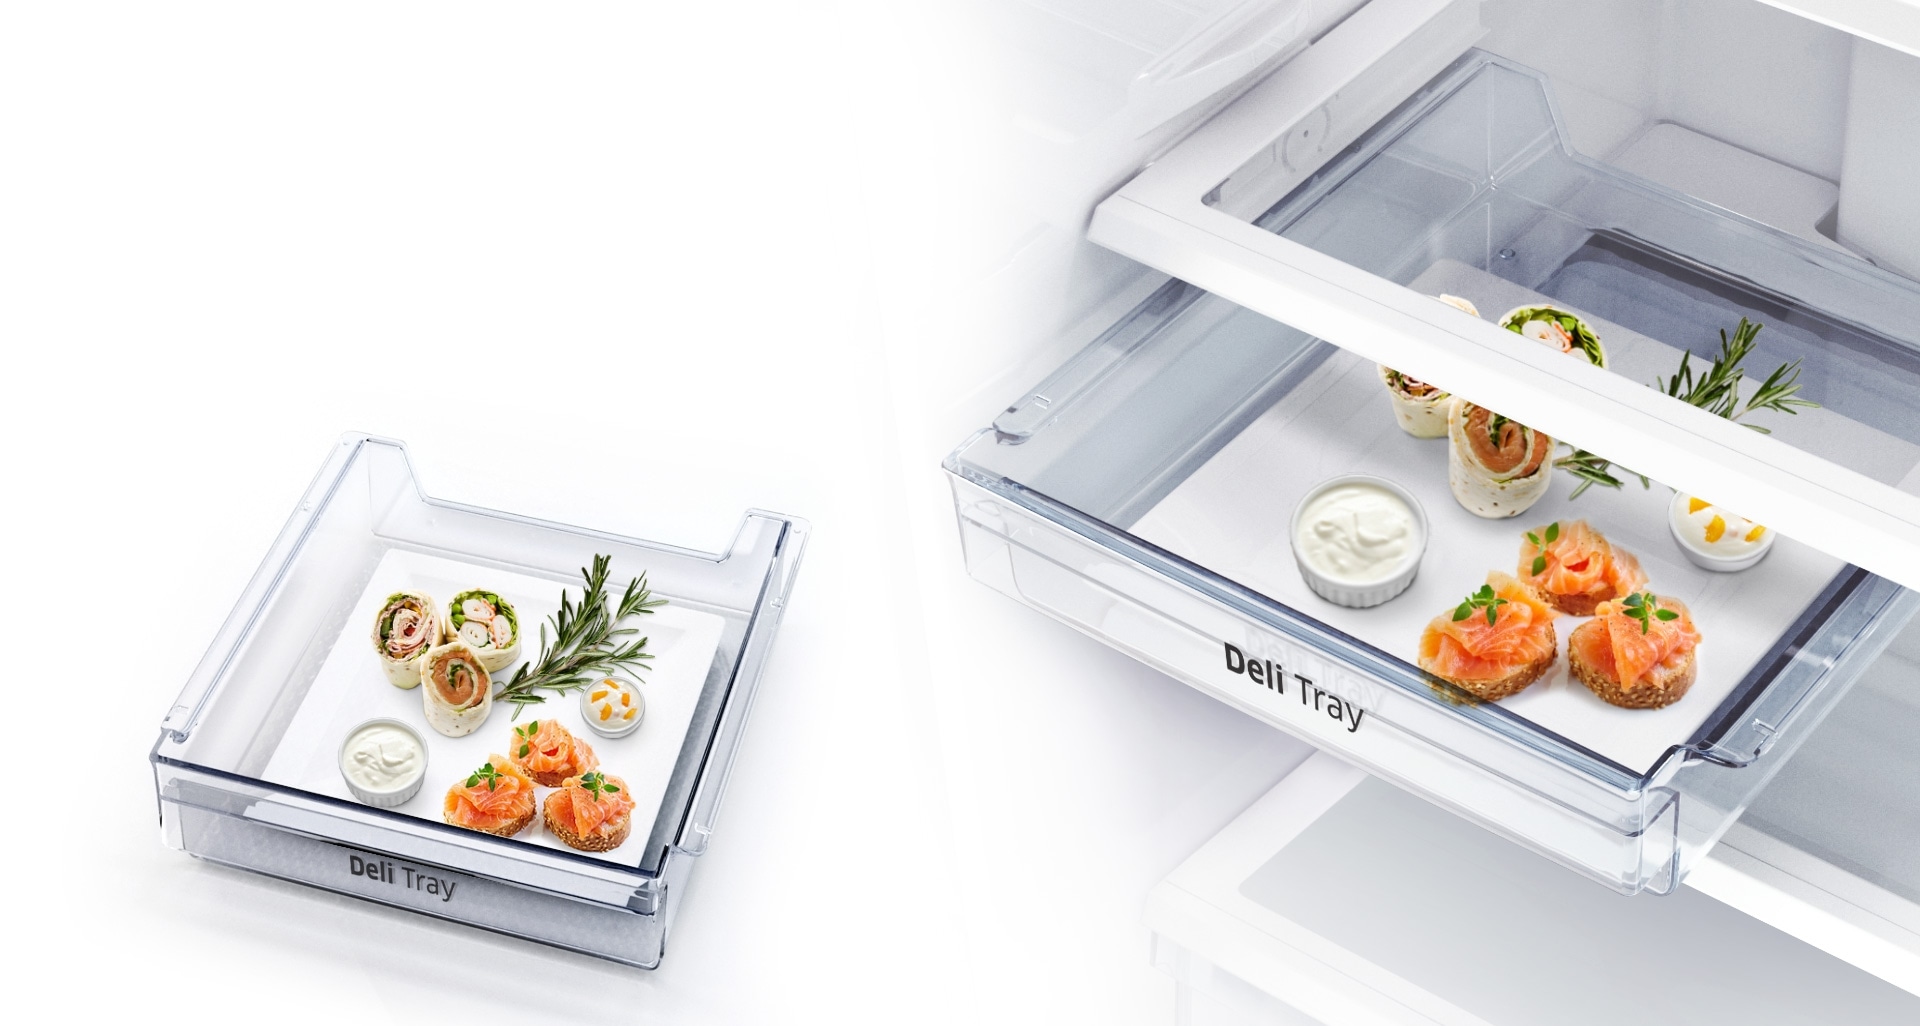 Easily organize and serve delicious foods